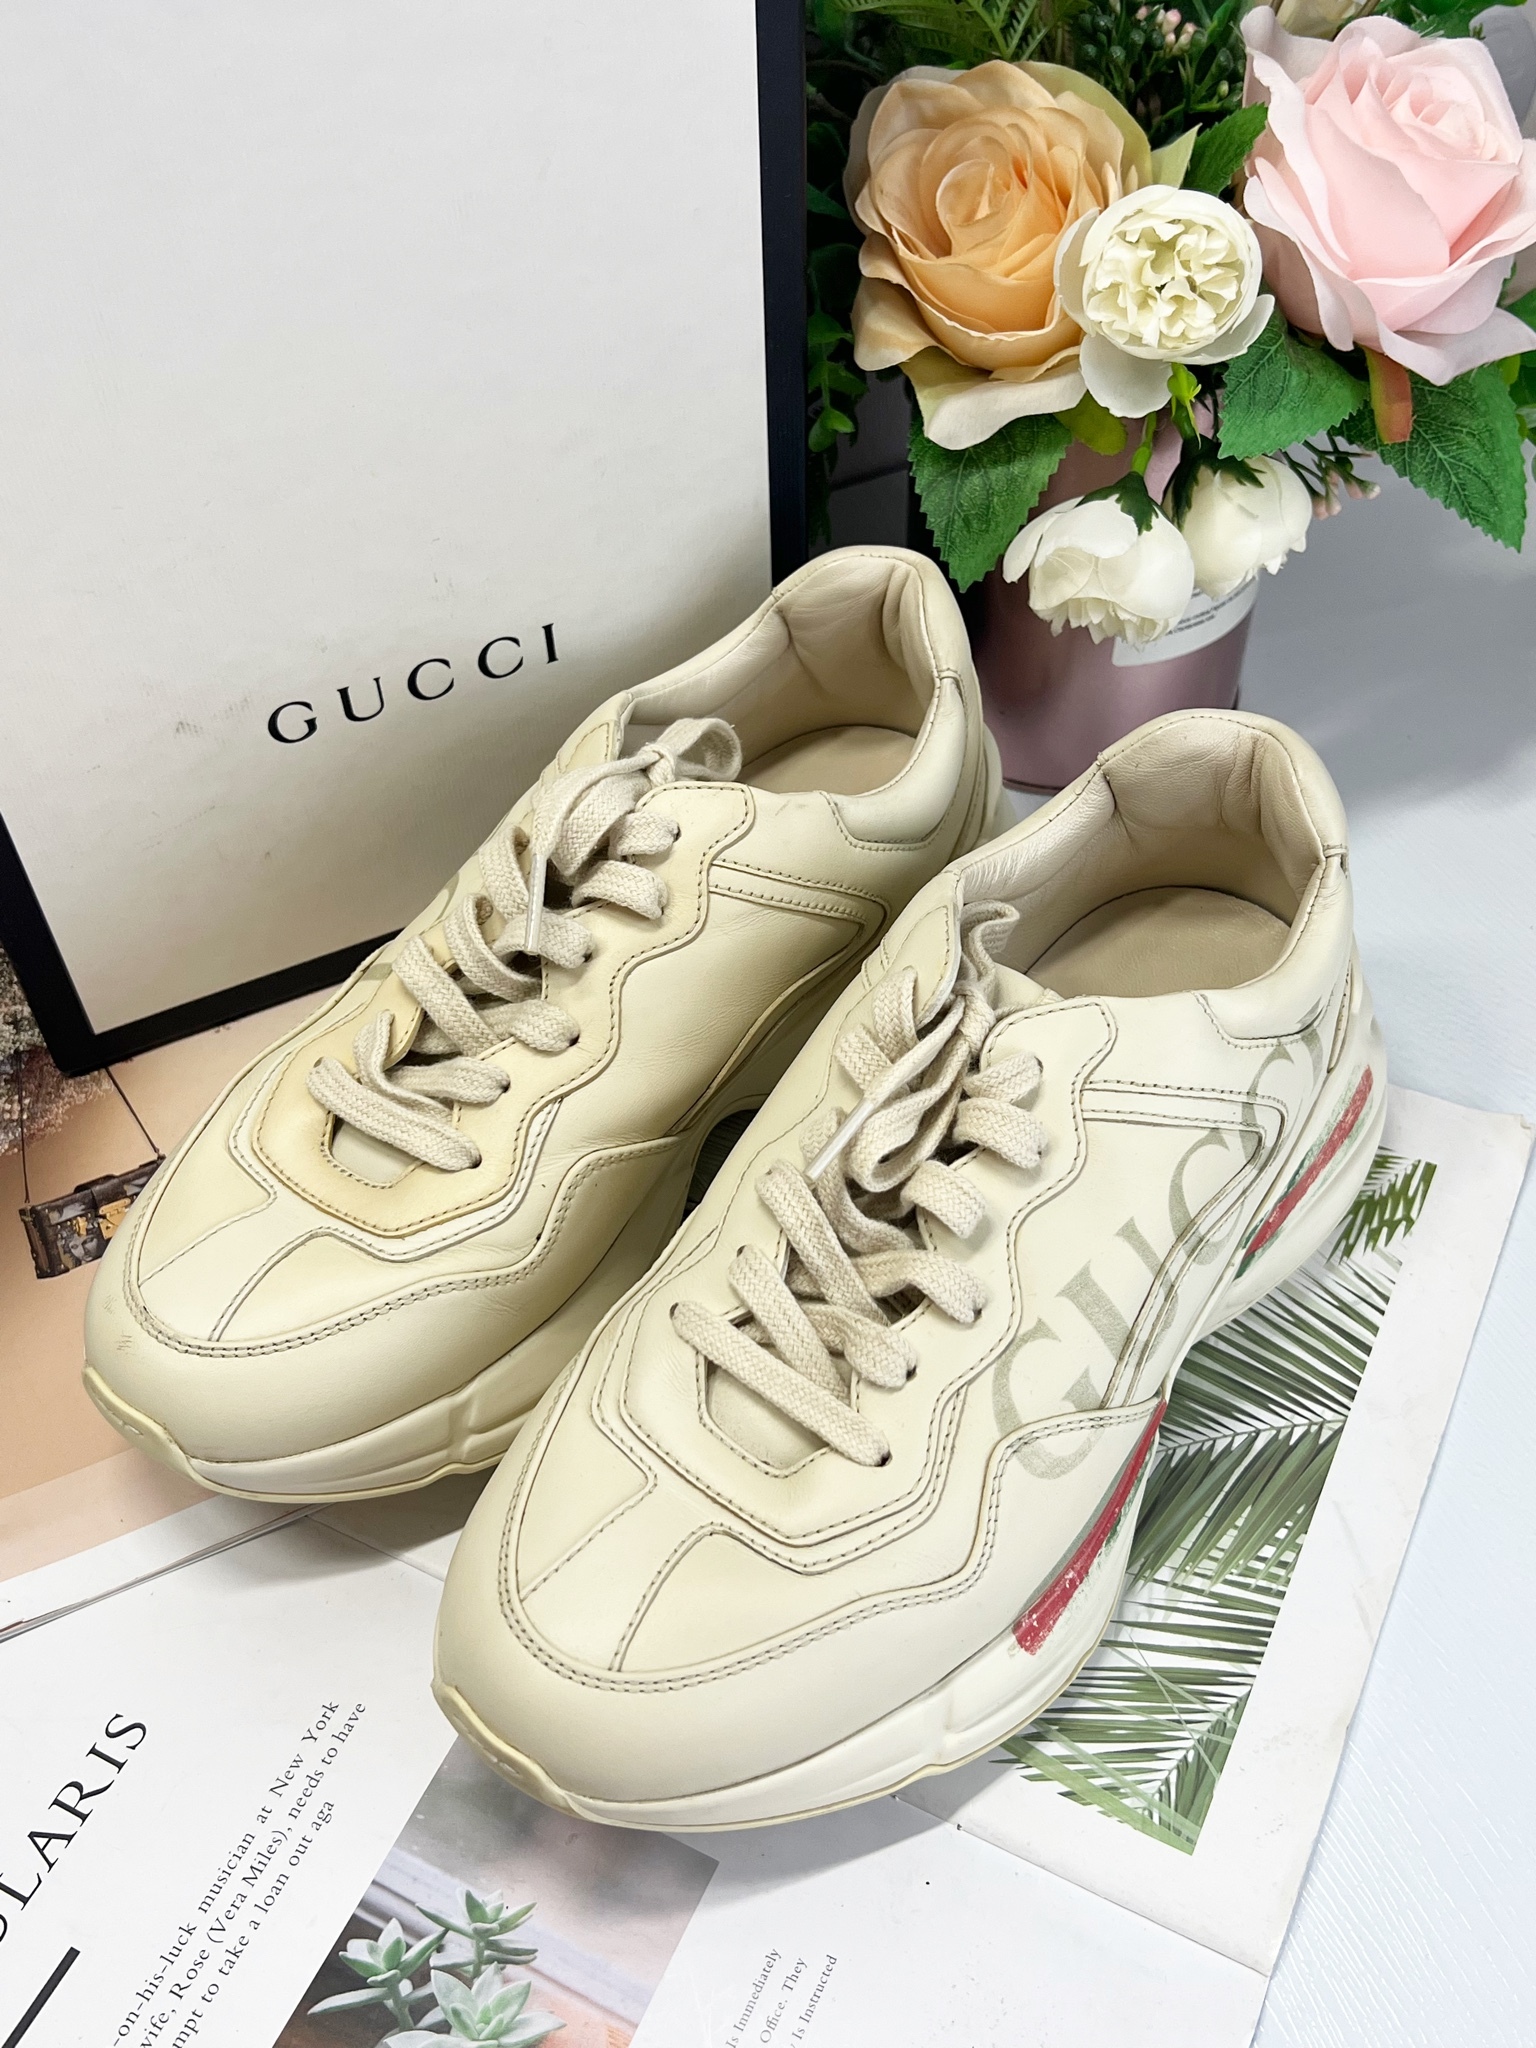 Gucci Women's Rhyton Gucci logo Leather Sneaker – My Paris Branded  Station-Sell Your Bags And Get Instant Cash